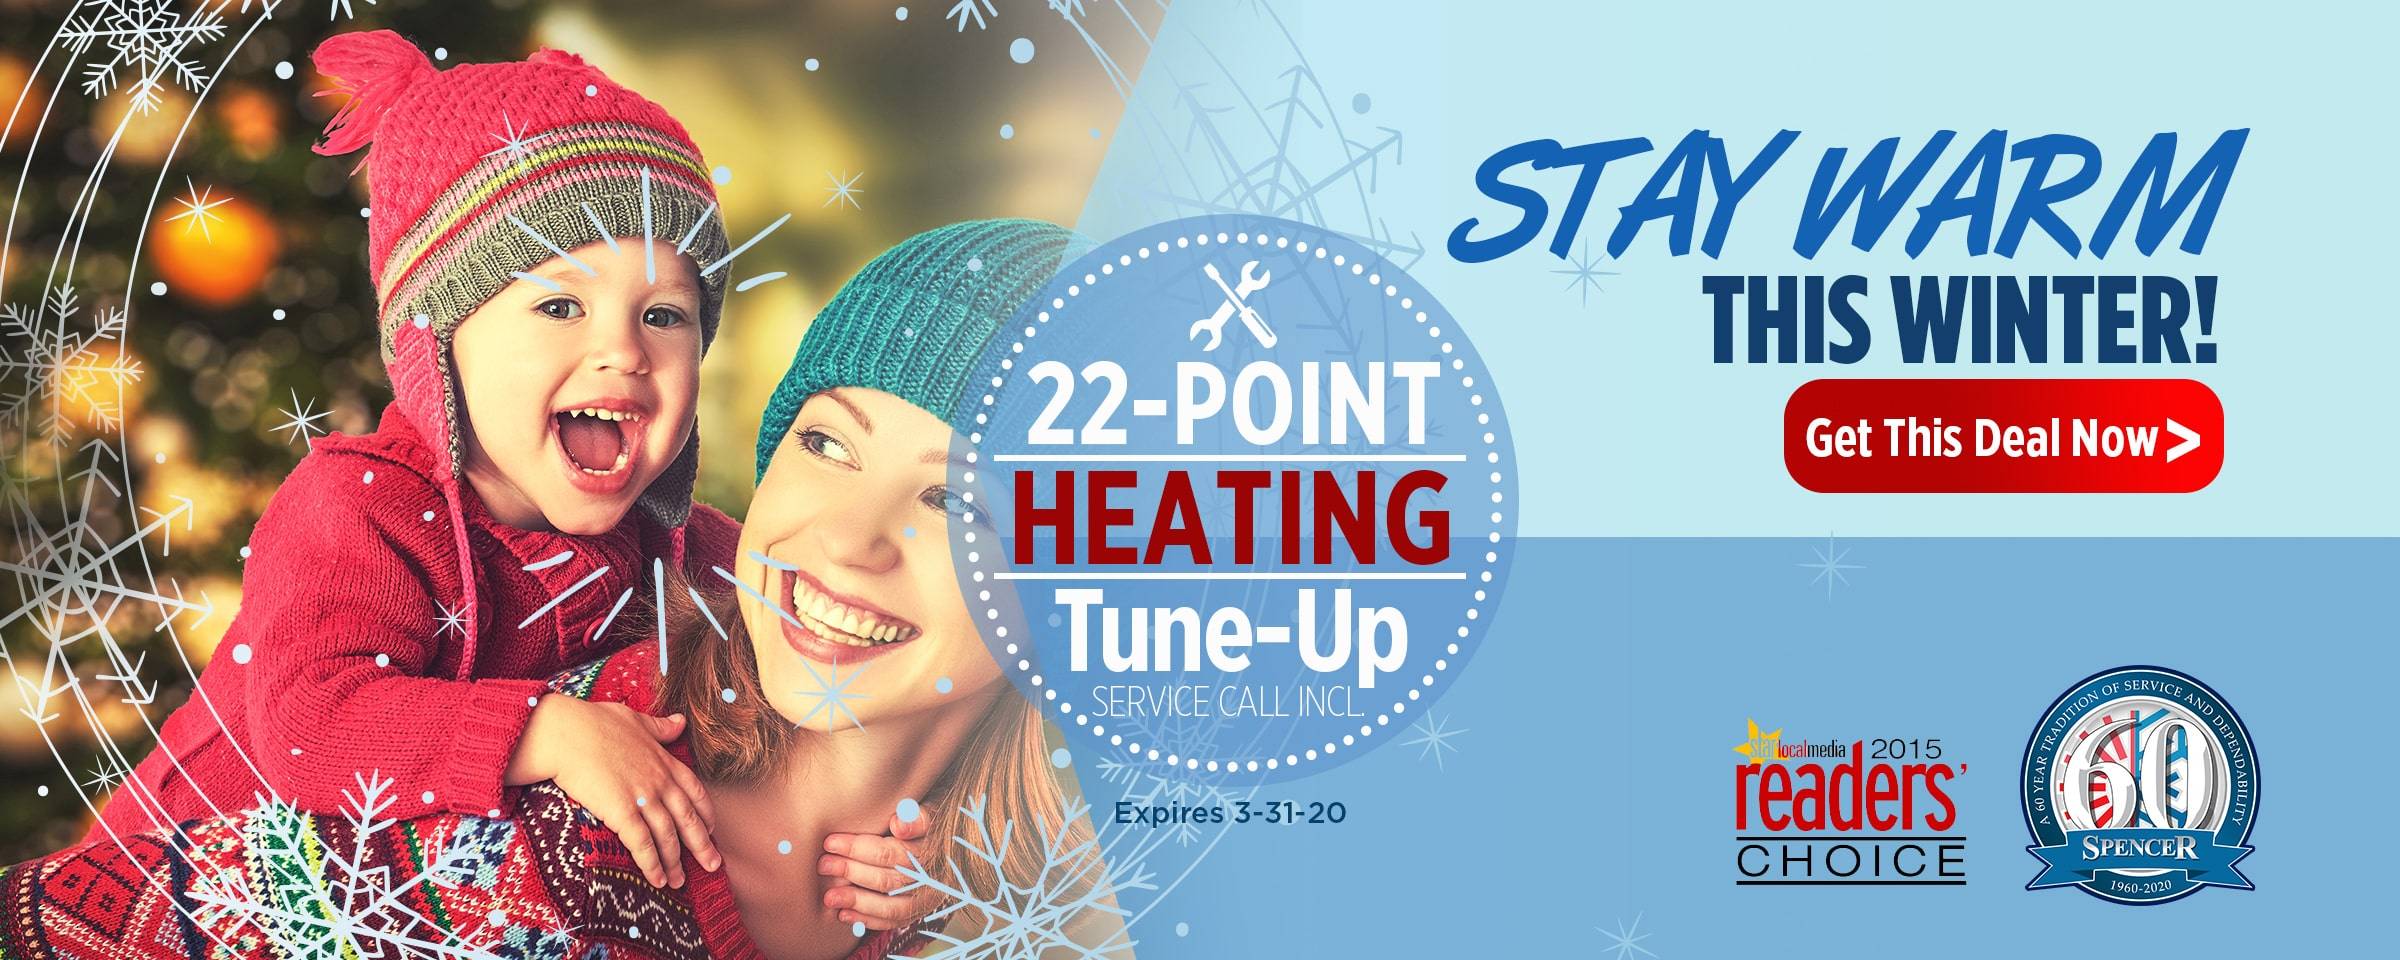 Spencer Winter Promo stay warm this winter get this deal now 22 point heating tune up